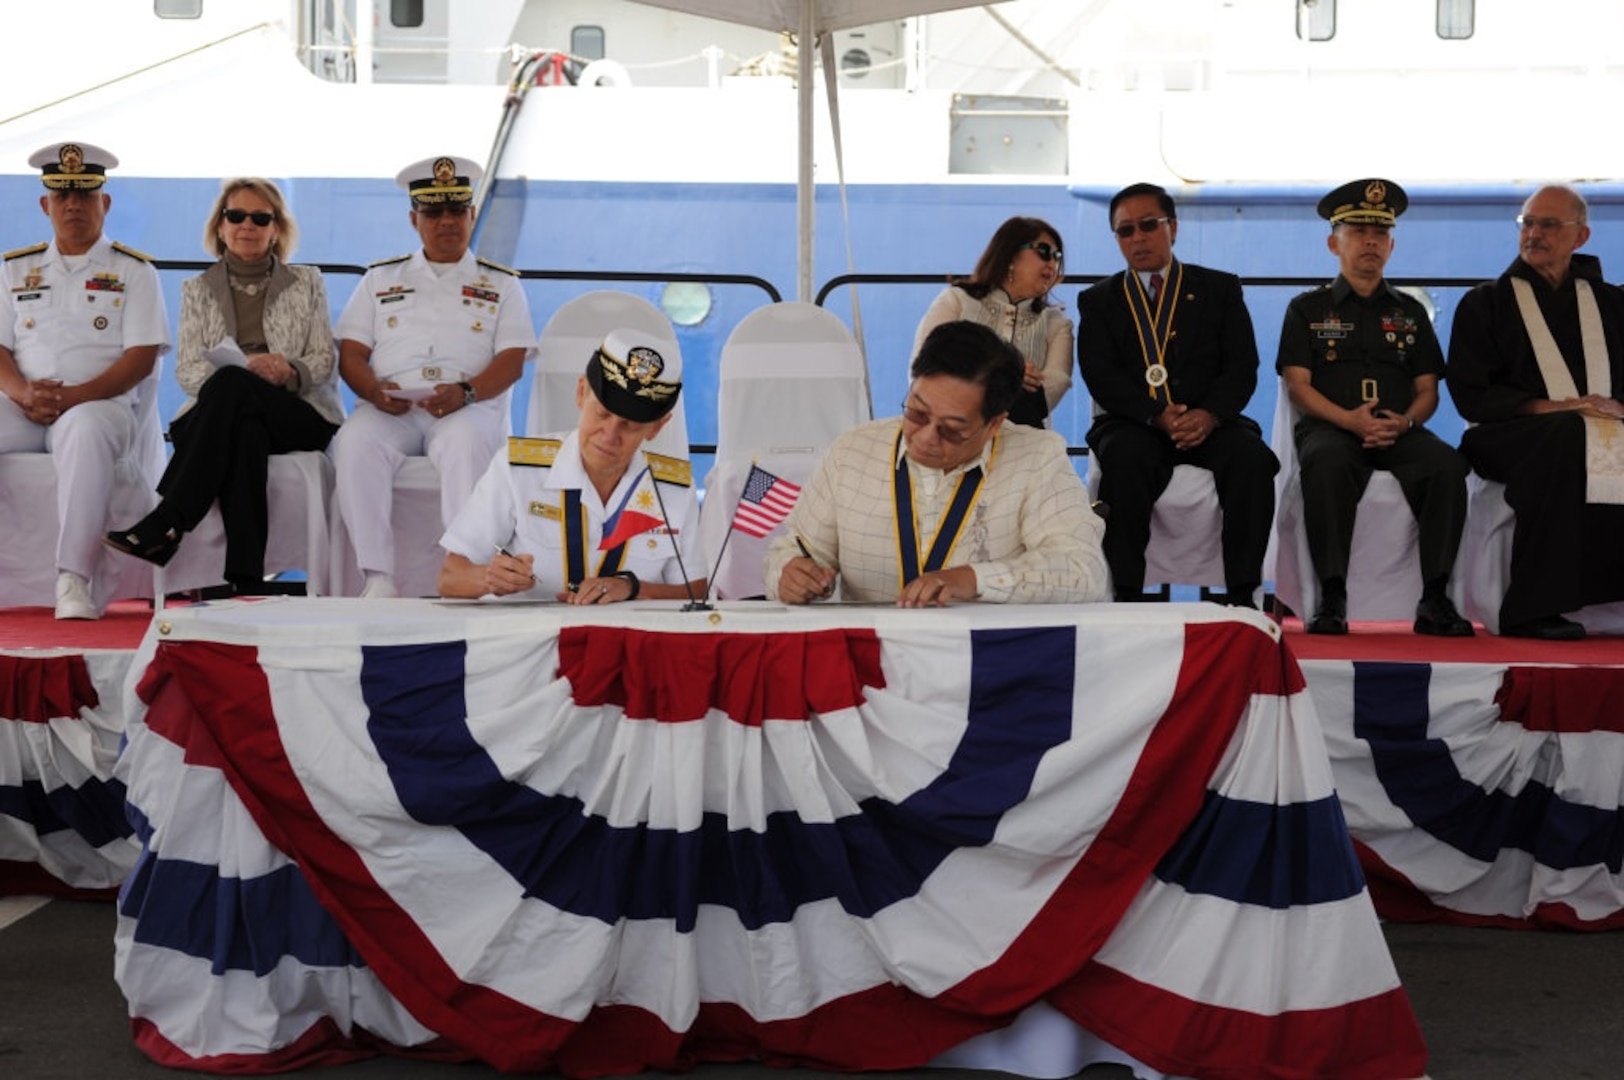 SAN DIEGO (April 27, 2016) - Vice Adm. Nora Tyson, left, commander of U.S. 3rd Fleet, and Leo Herrera-Lim, Philippine Consul General in Los Angeles, sign documents transferring ownership of the research vessel (R/V) Melville to the Philippine Navy during a ceremony at Naval Base, where it was commissioned as BRP Gregorio Velasquez (AGR 702). The ship was transferred under the U.S. Department of Defense's excess defense articles program to help augment the Republic of the Philippines oceanographic research and study capabilities. 